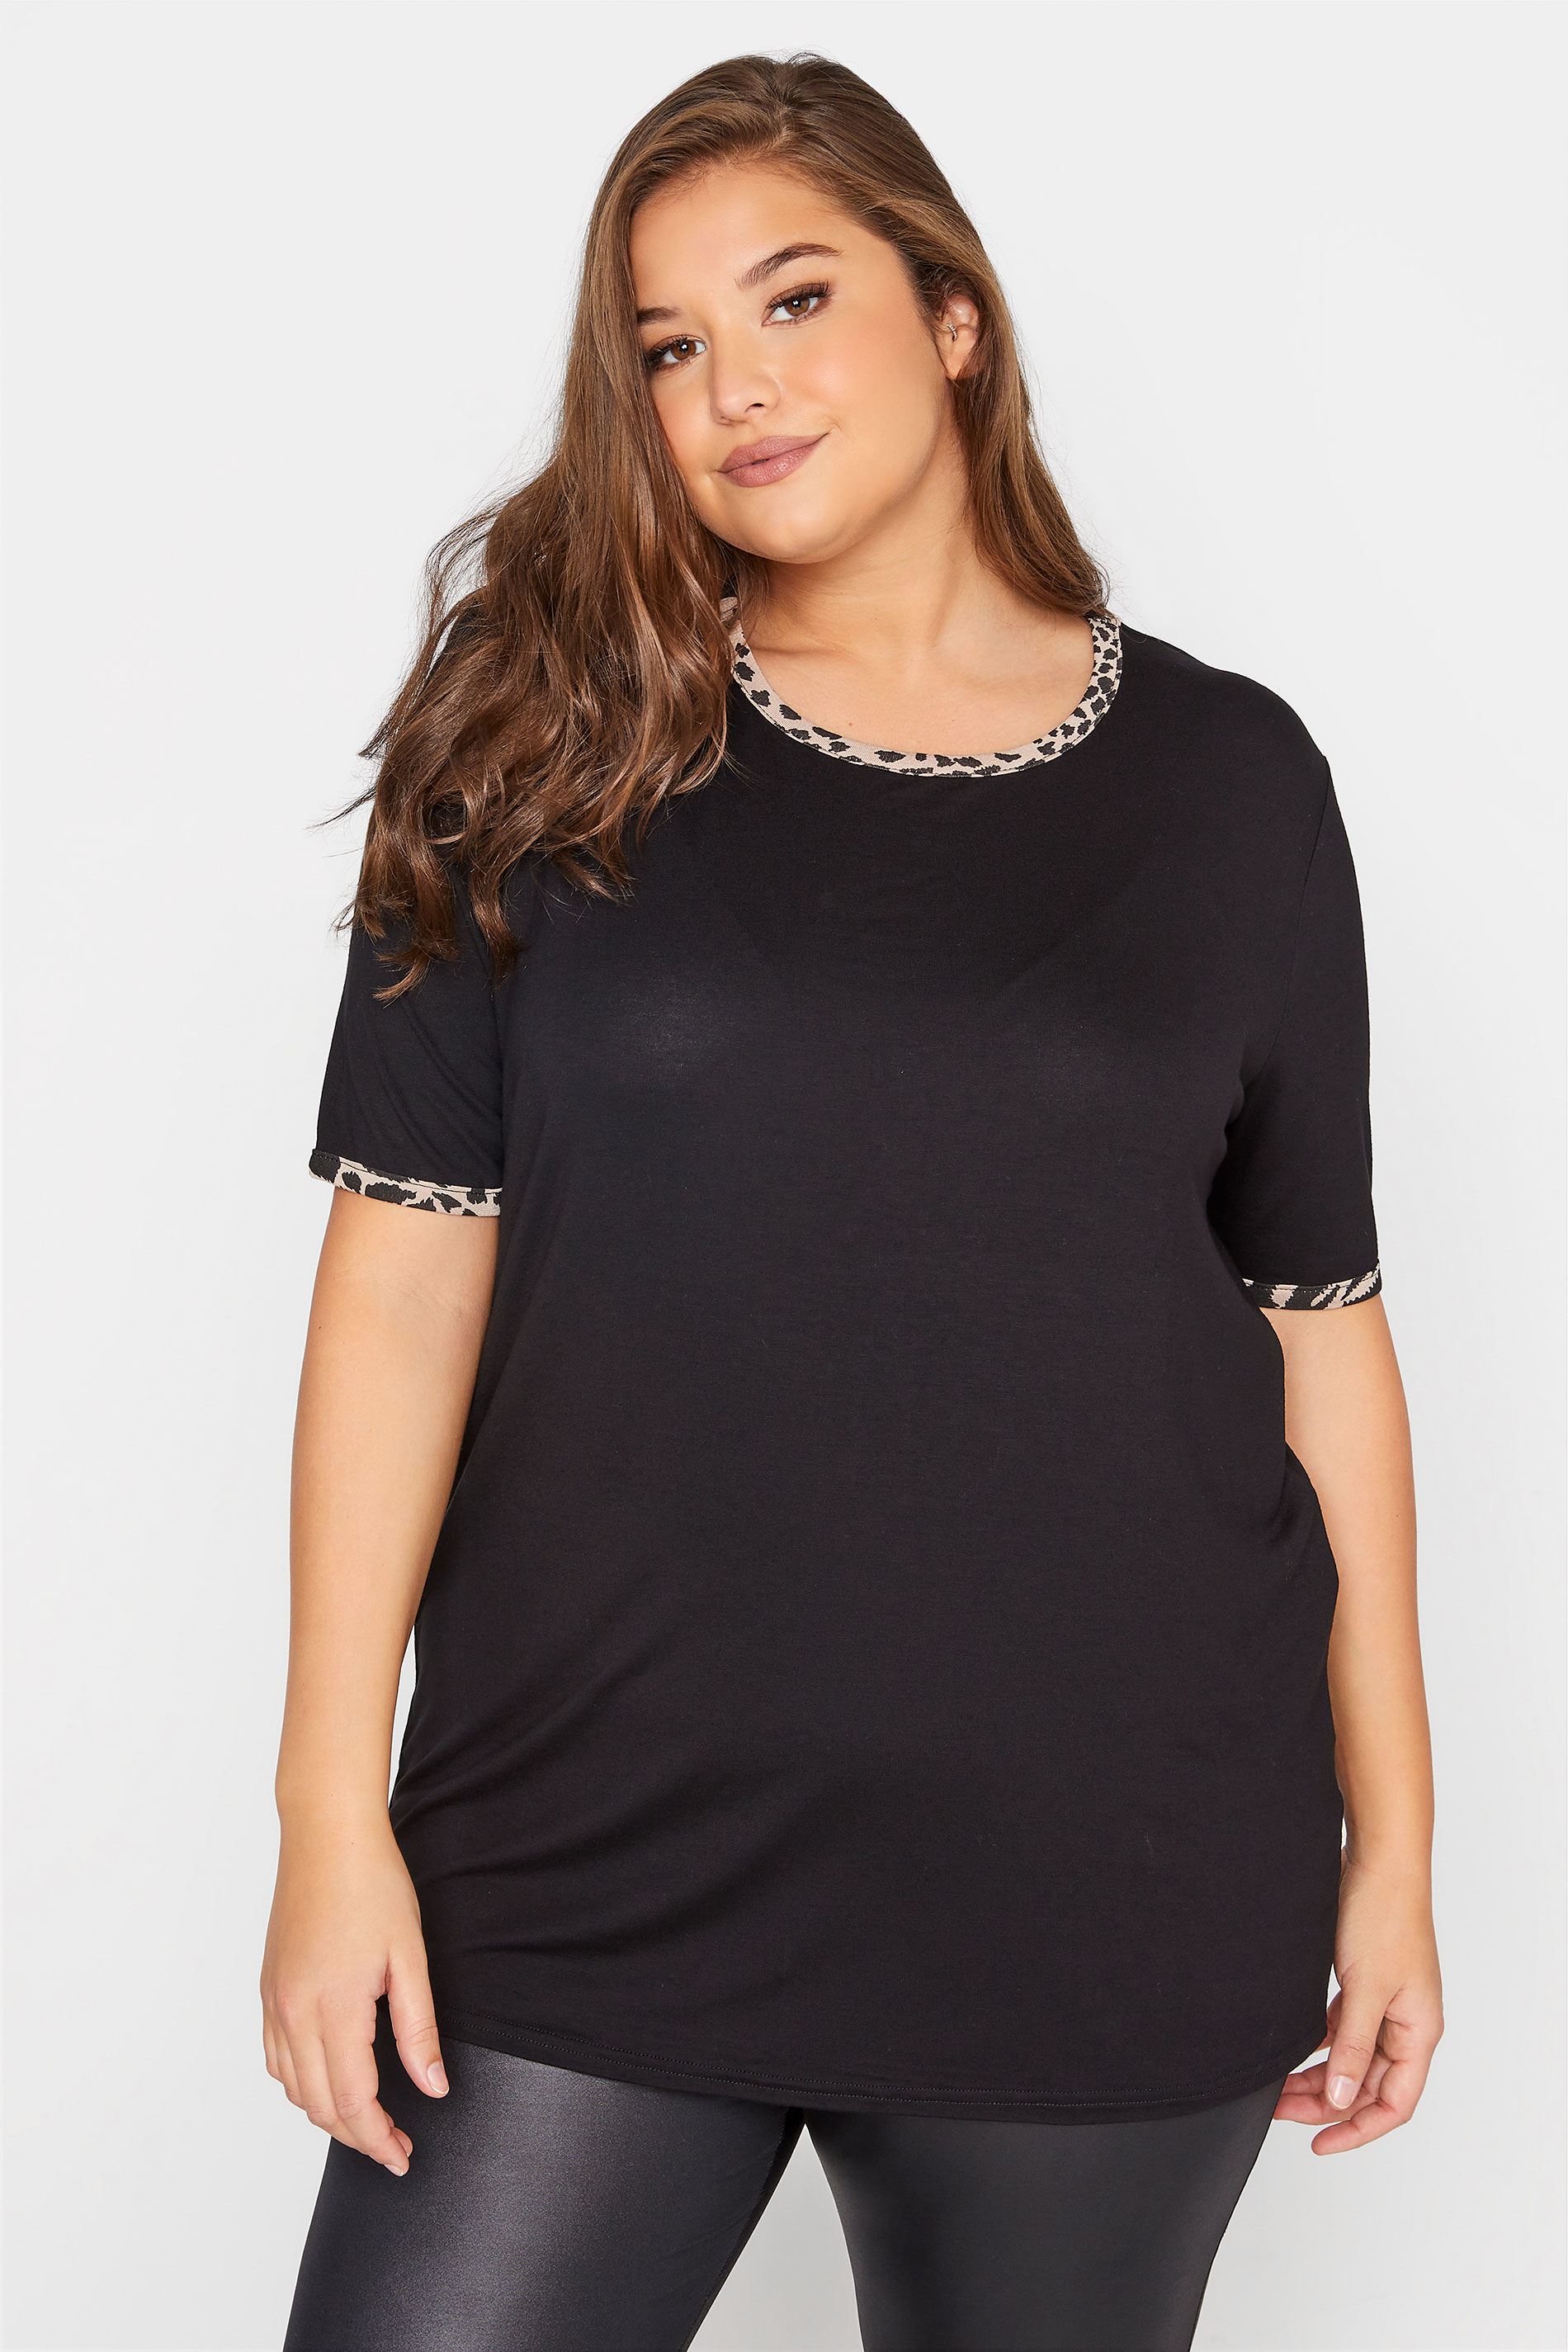 Grande taille  Tops Grande taille  Tops Jersey | LIMITED COLLECTION - T-Shirt Noir Bordure Léopard - XK20715